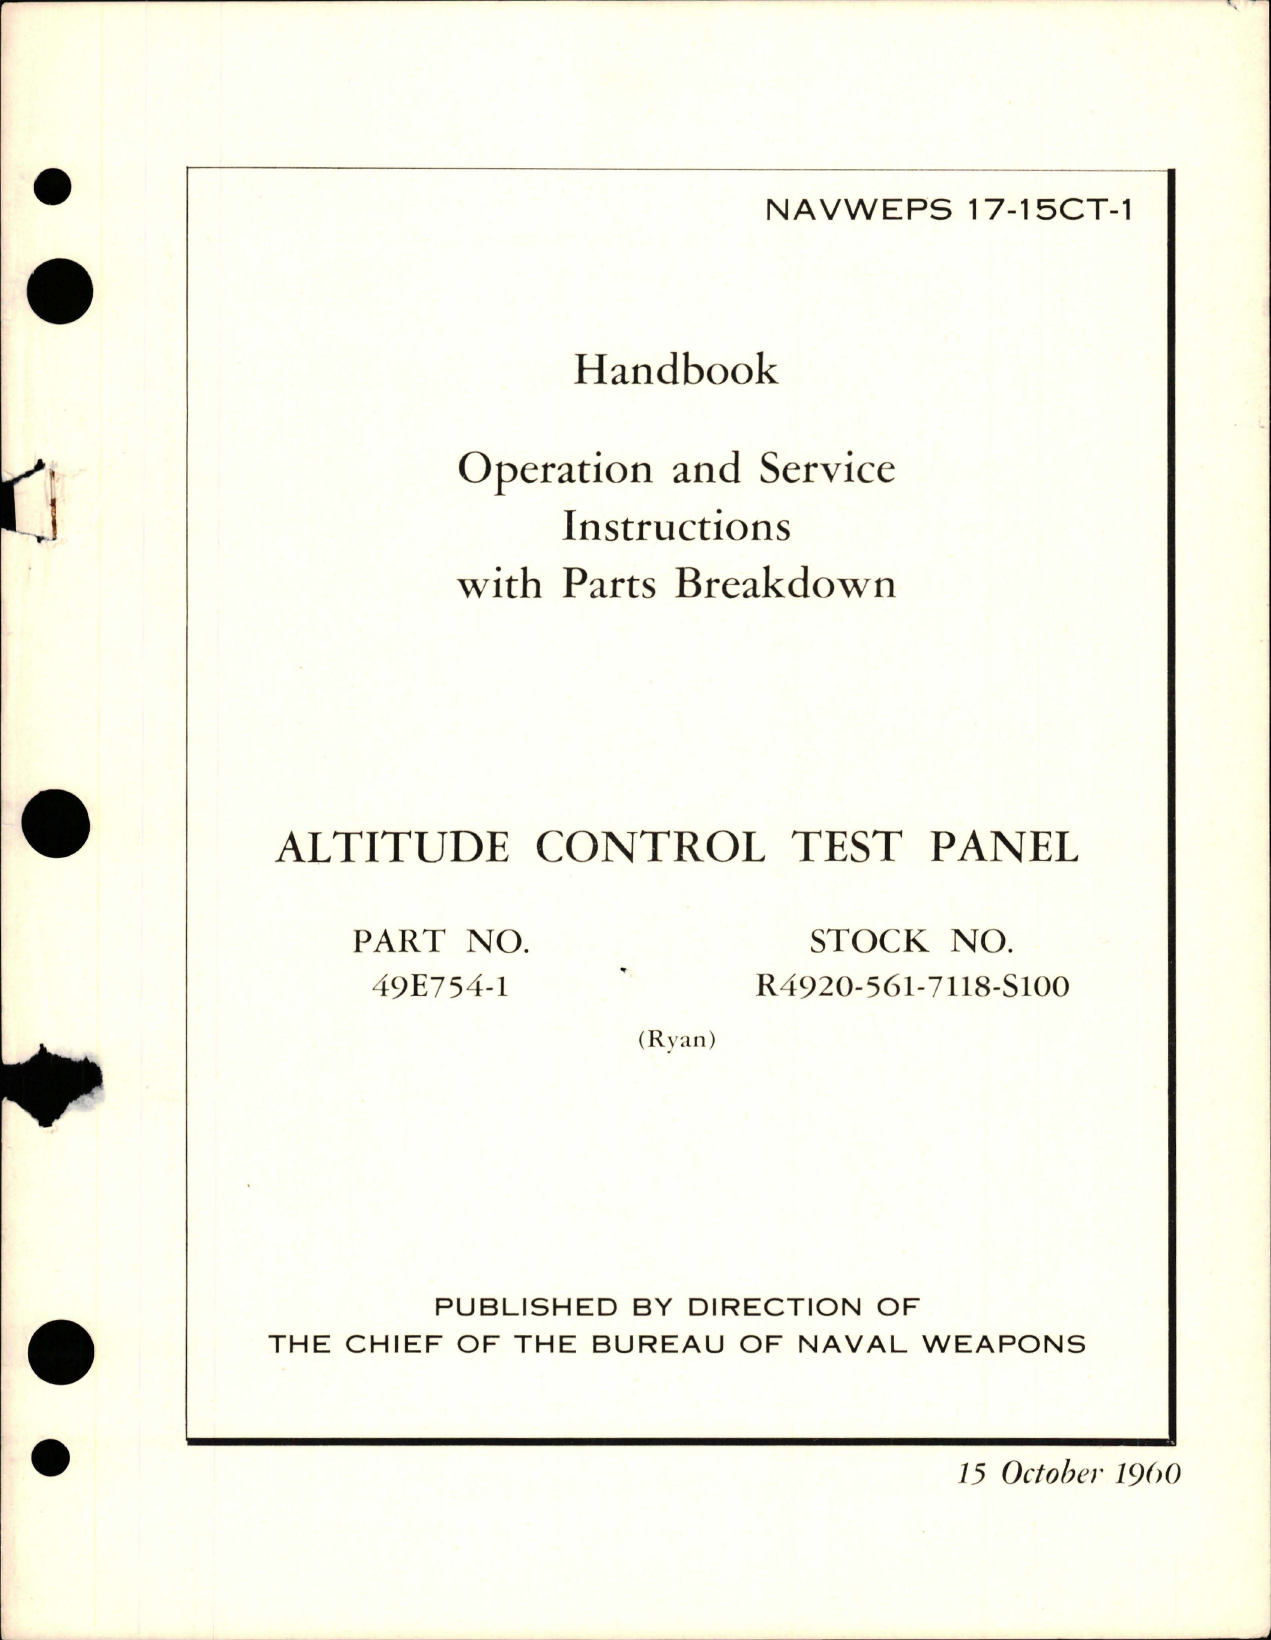 Sample page 1 from AirCorps Library document: Operation, Service Instructions and Parts Breakdown for Altitude Control Test Panel - Part 49E754-1